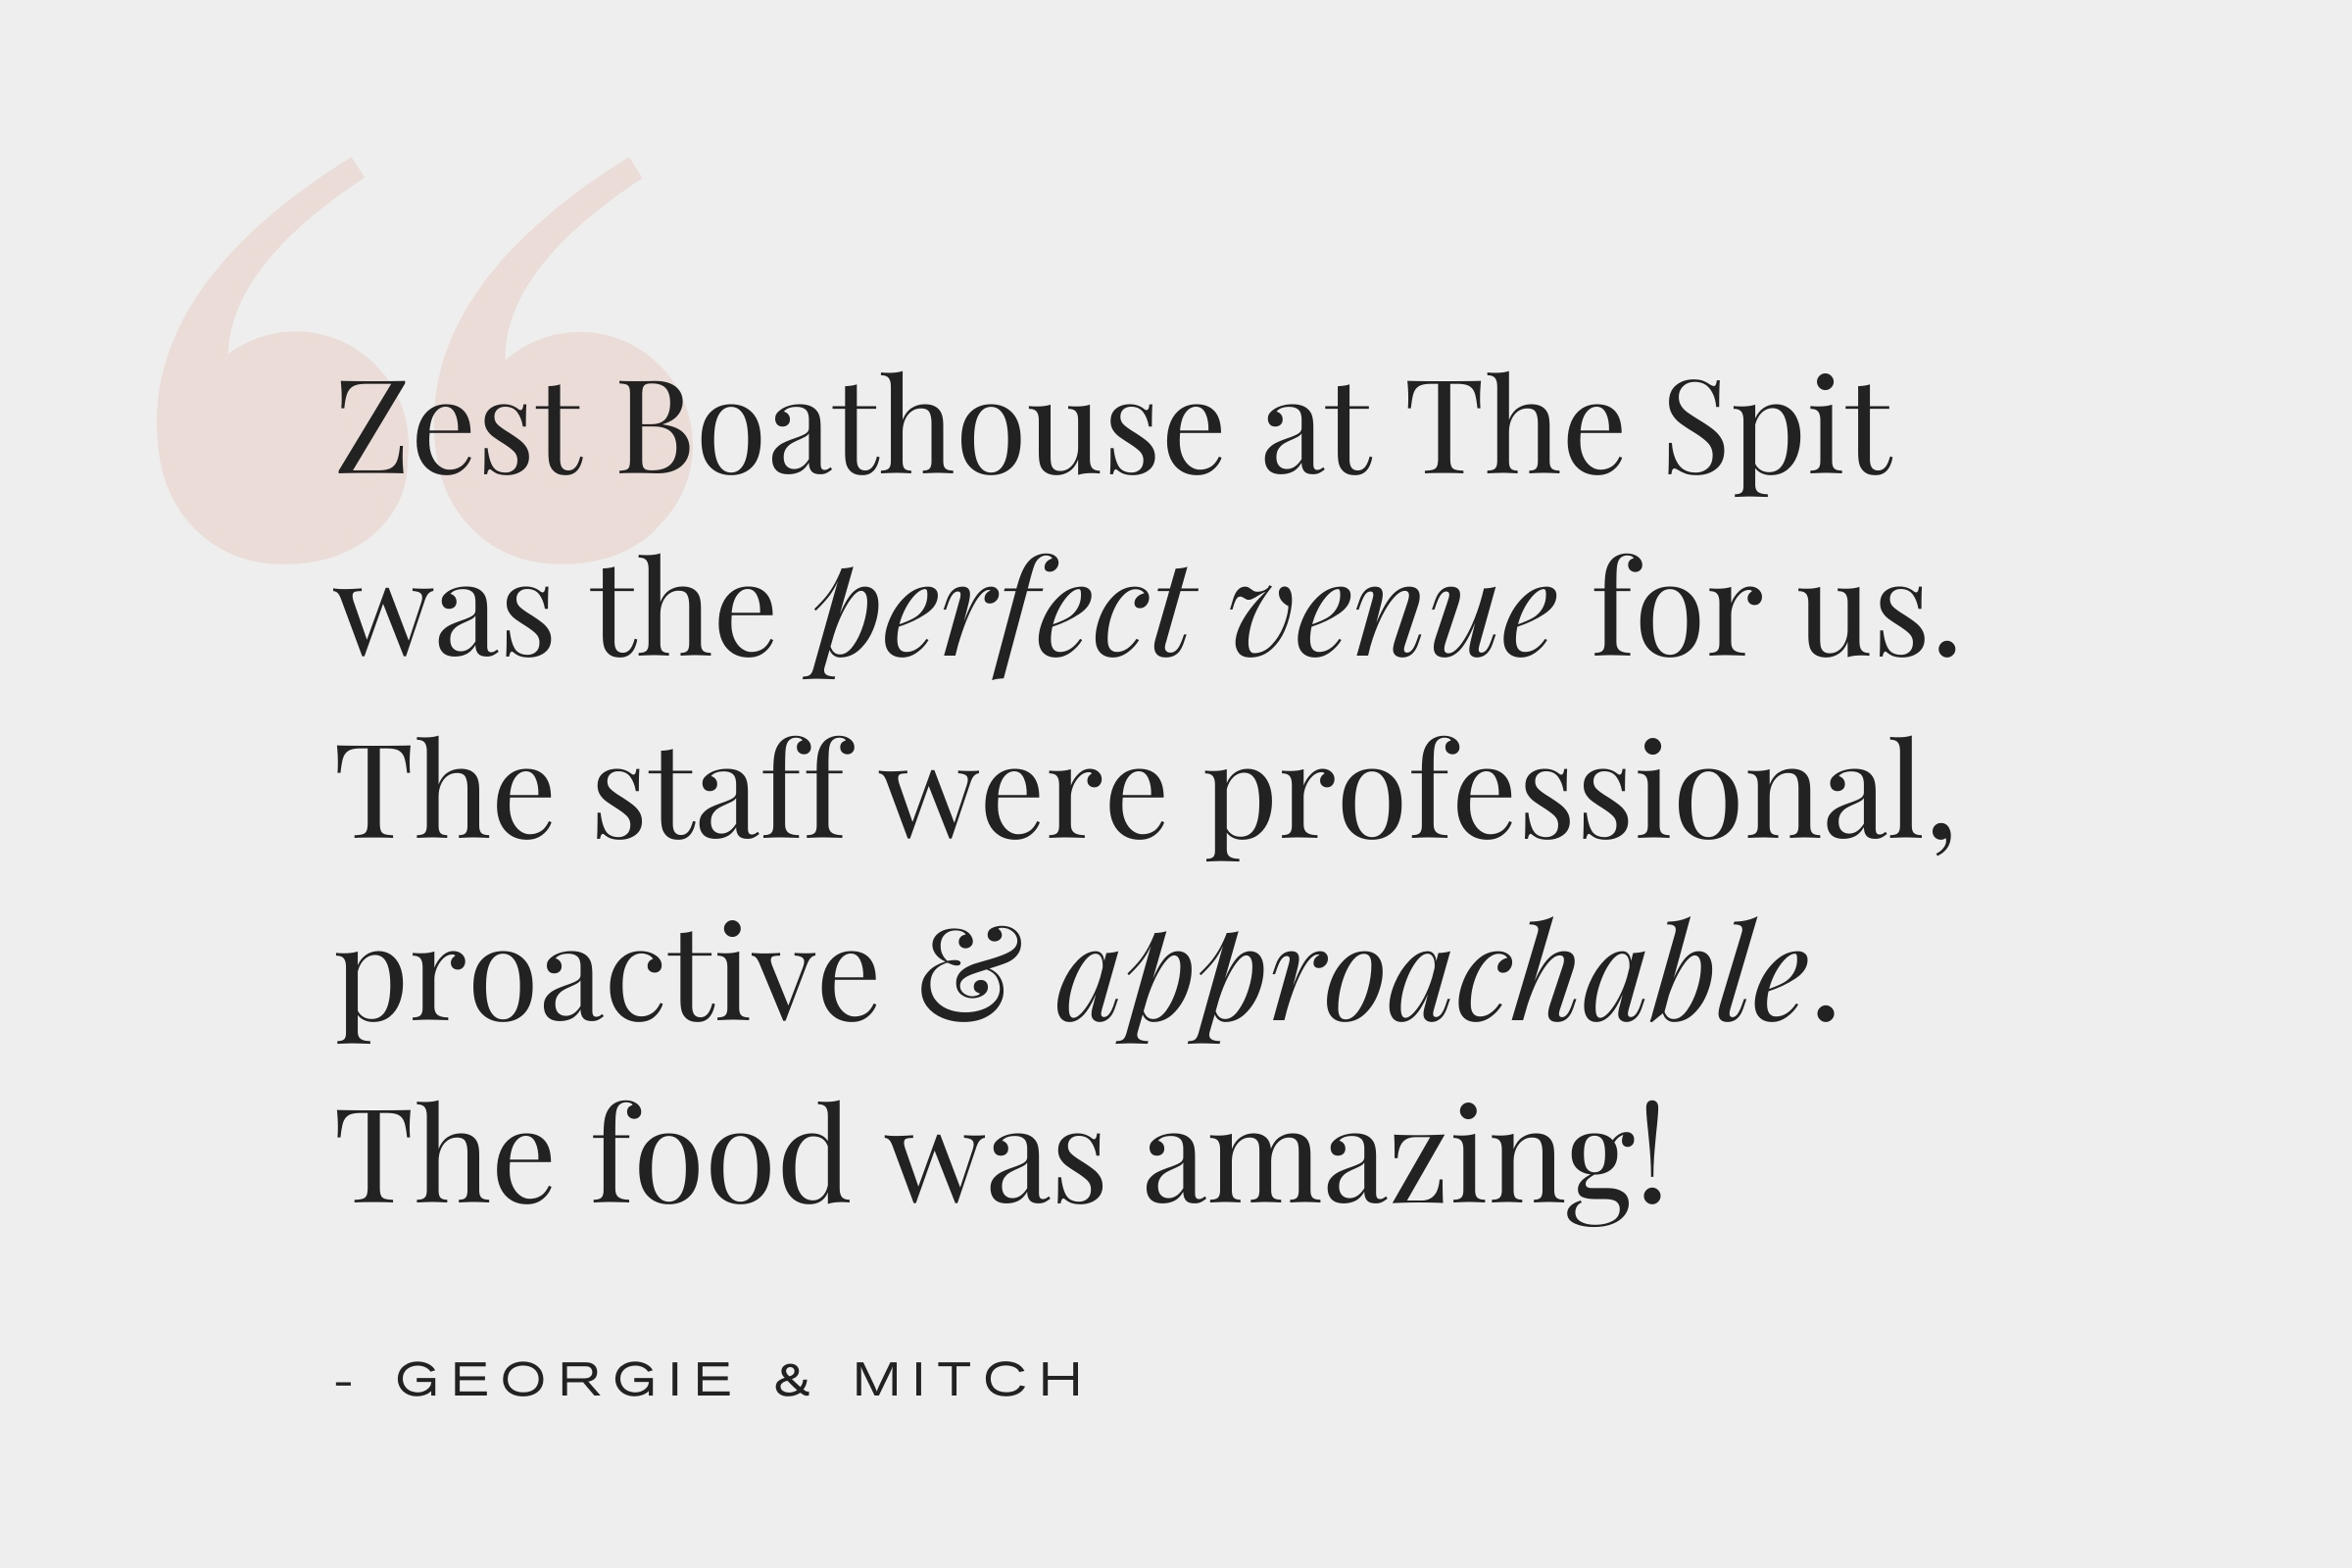 Zest Boathouse at The Spit was the perfect venue for us. The staff were professiona, proactive and approachable. The food was amazing